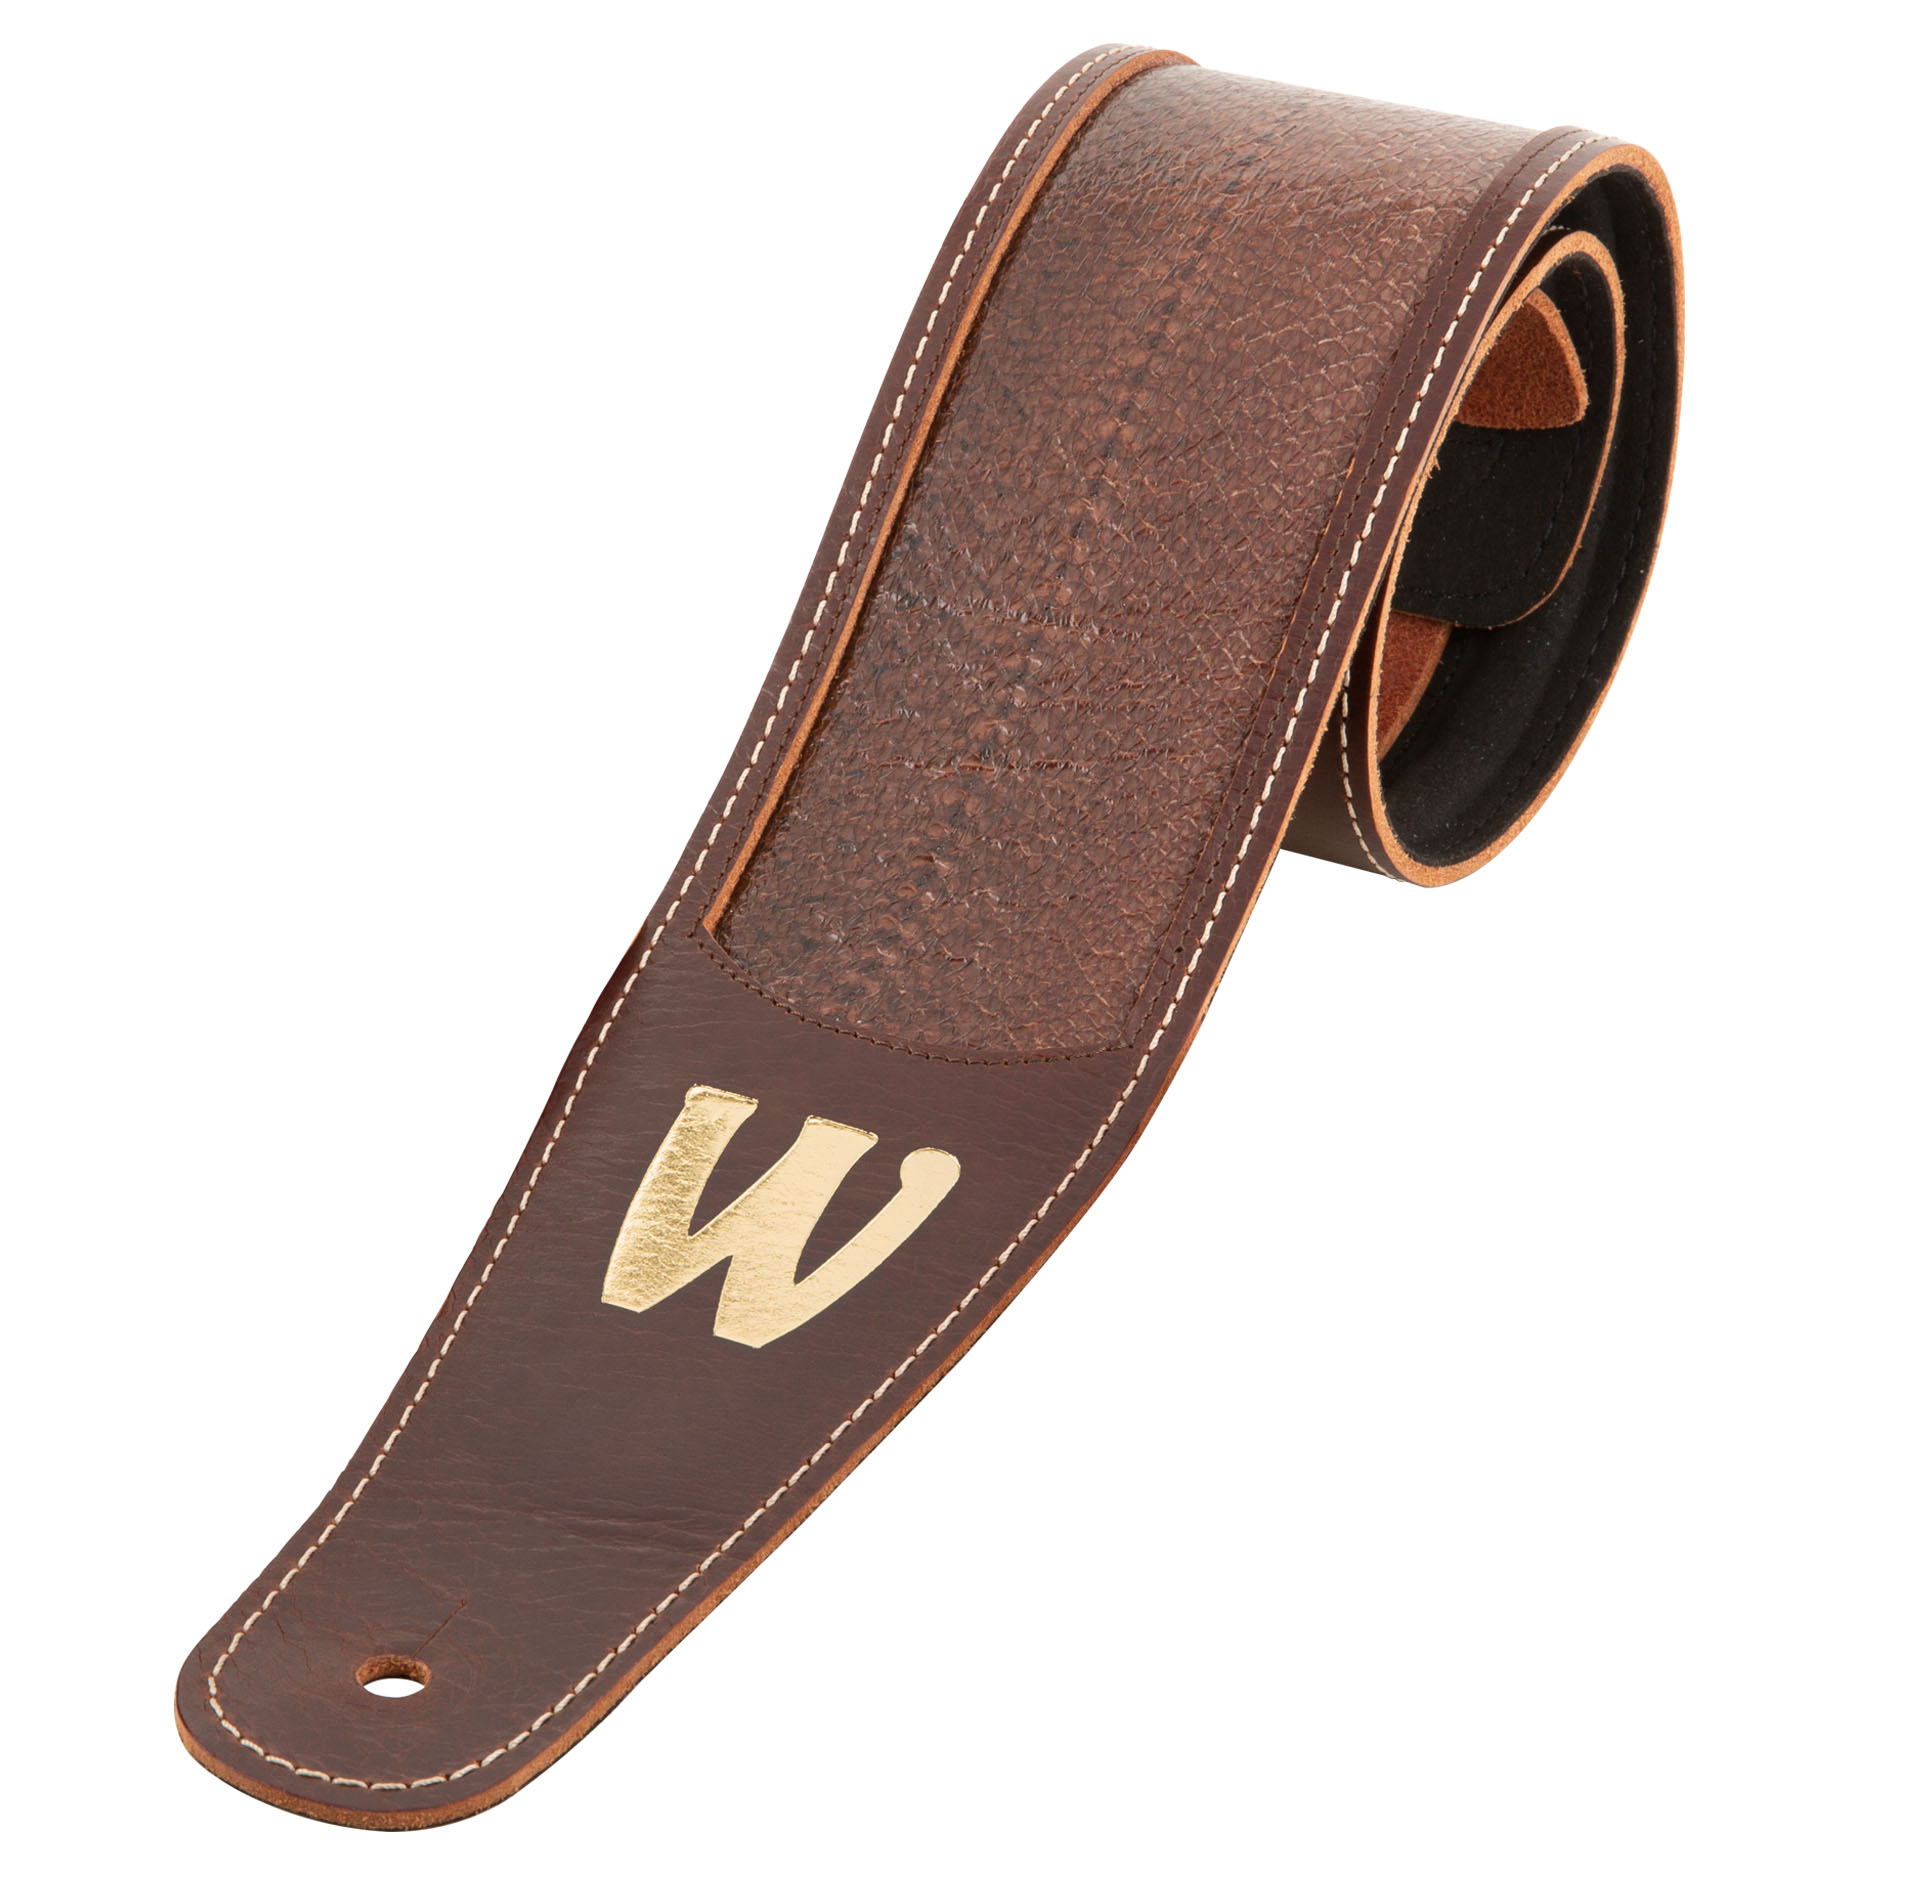 Warwick Masterbuilt Genuine Leather Bass Strap - Brown, Gold Embossing